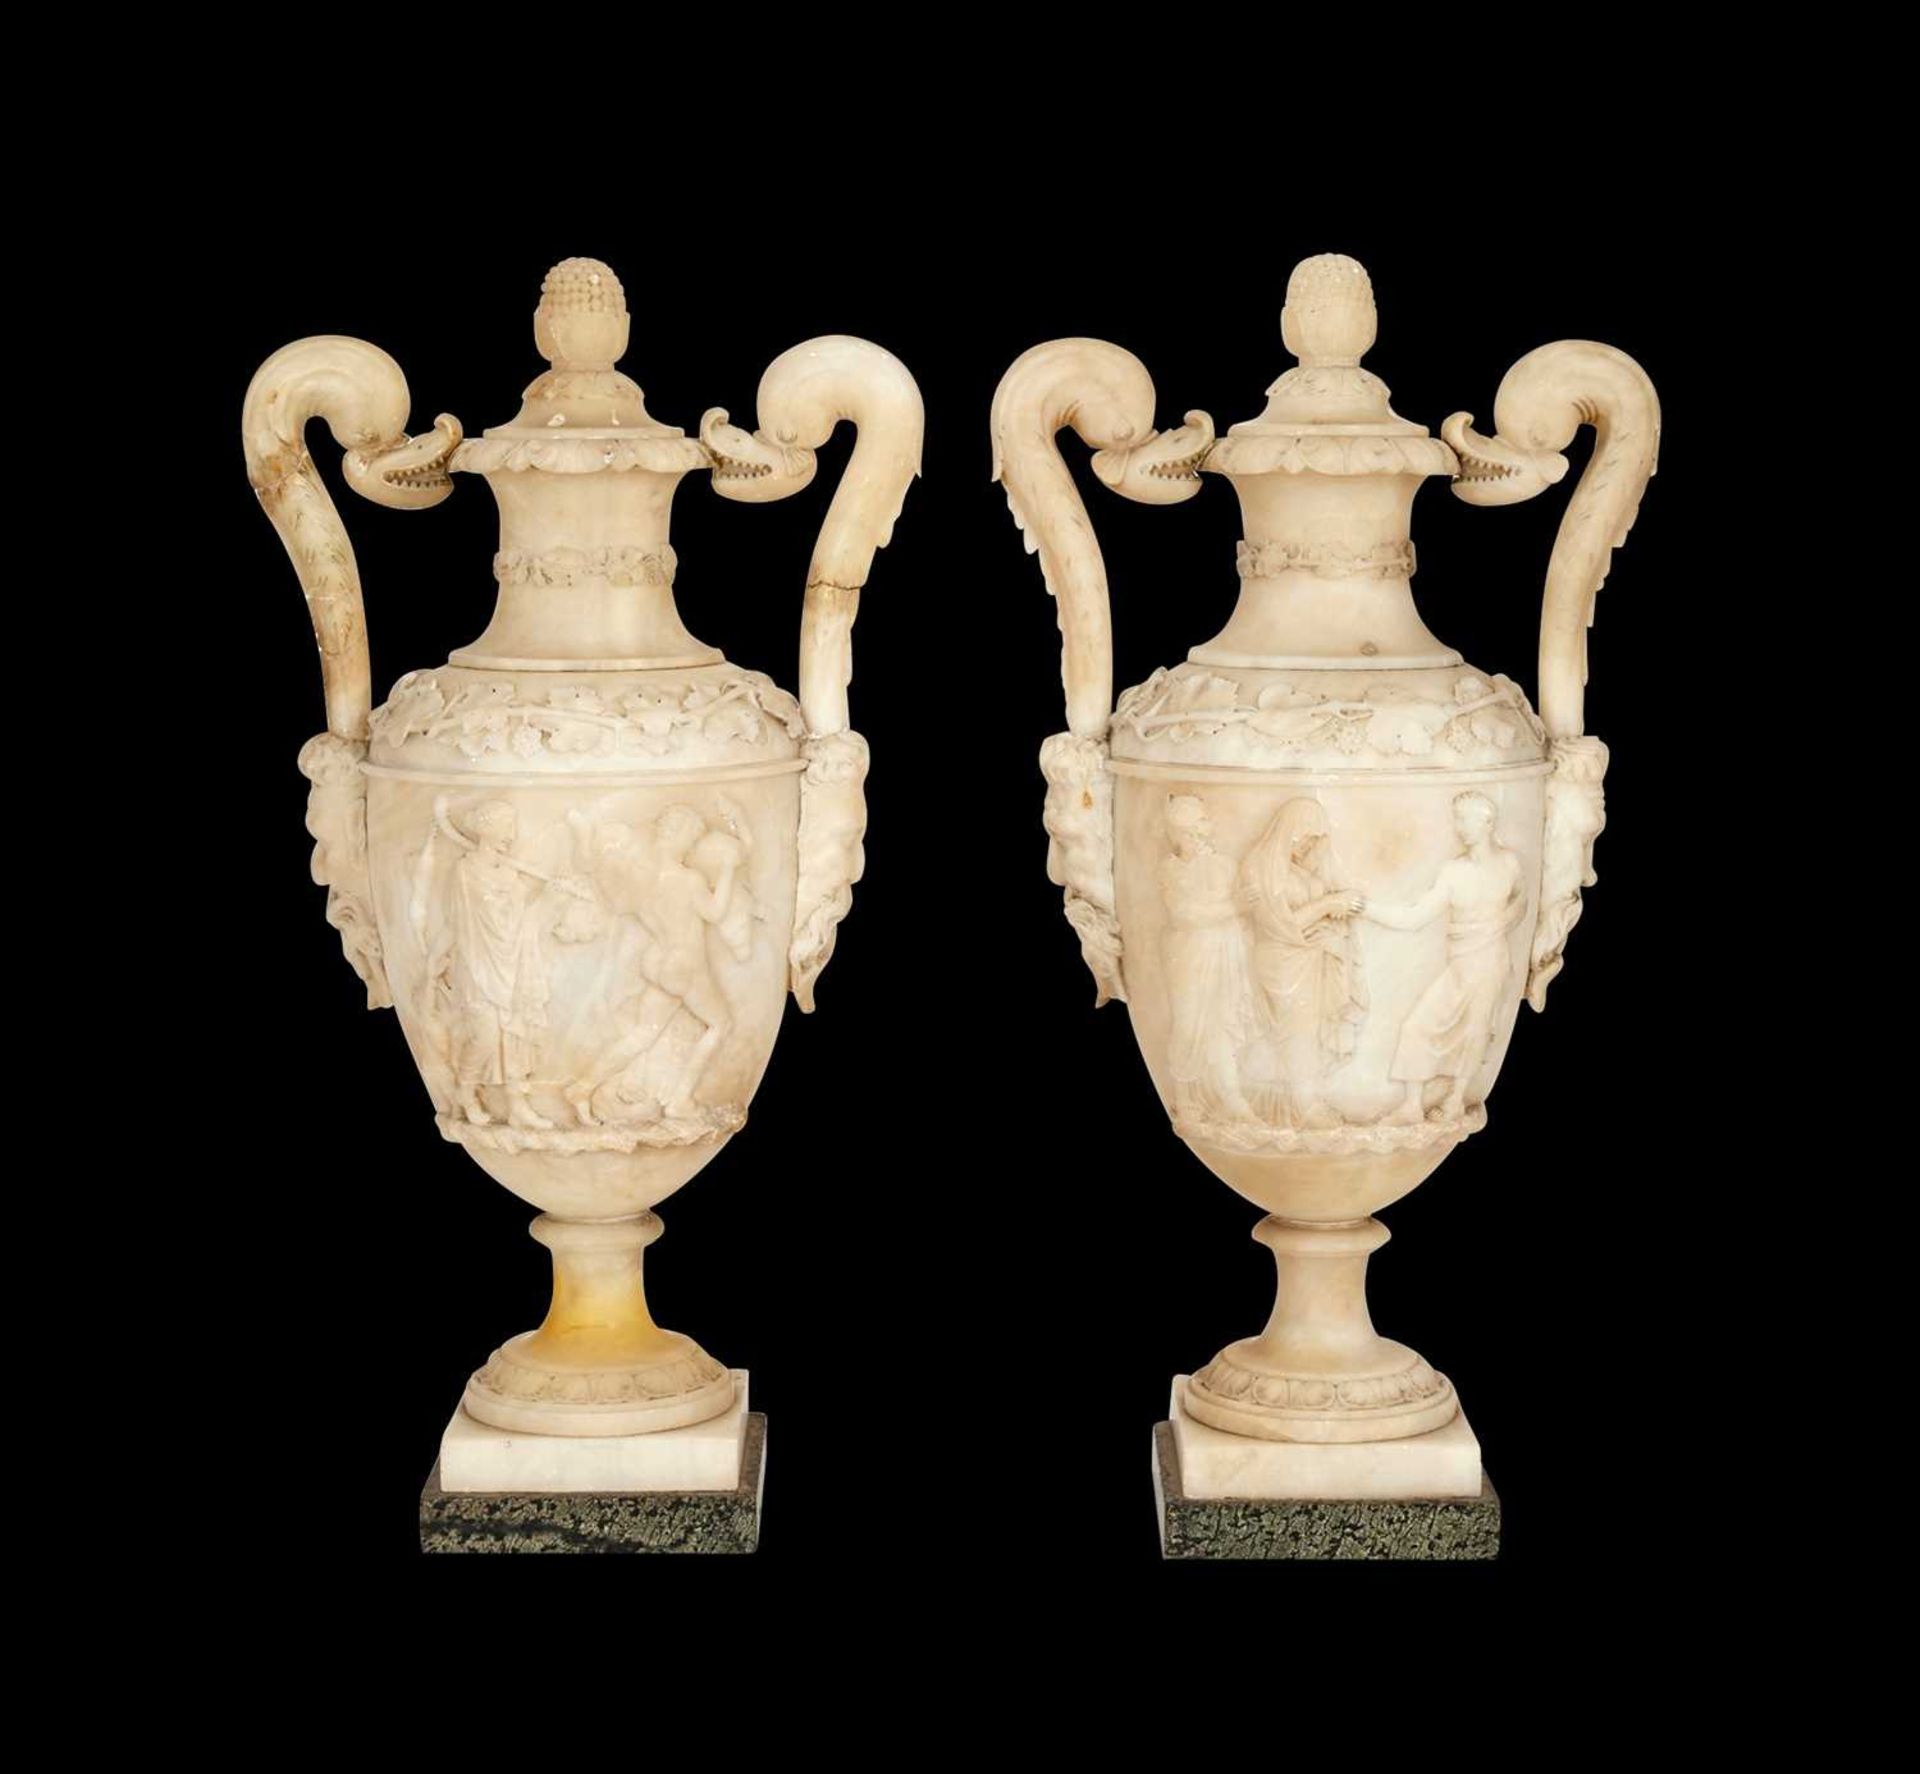 A LARGE PAIR OF 19TH CENTURY ITALIAN ALABASTER URNS AND COVERS IN THE STYLE OF PIRANESI - Image 8 of 12